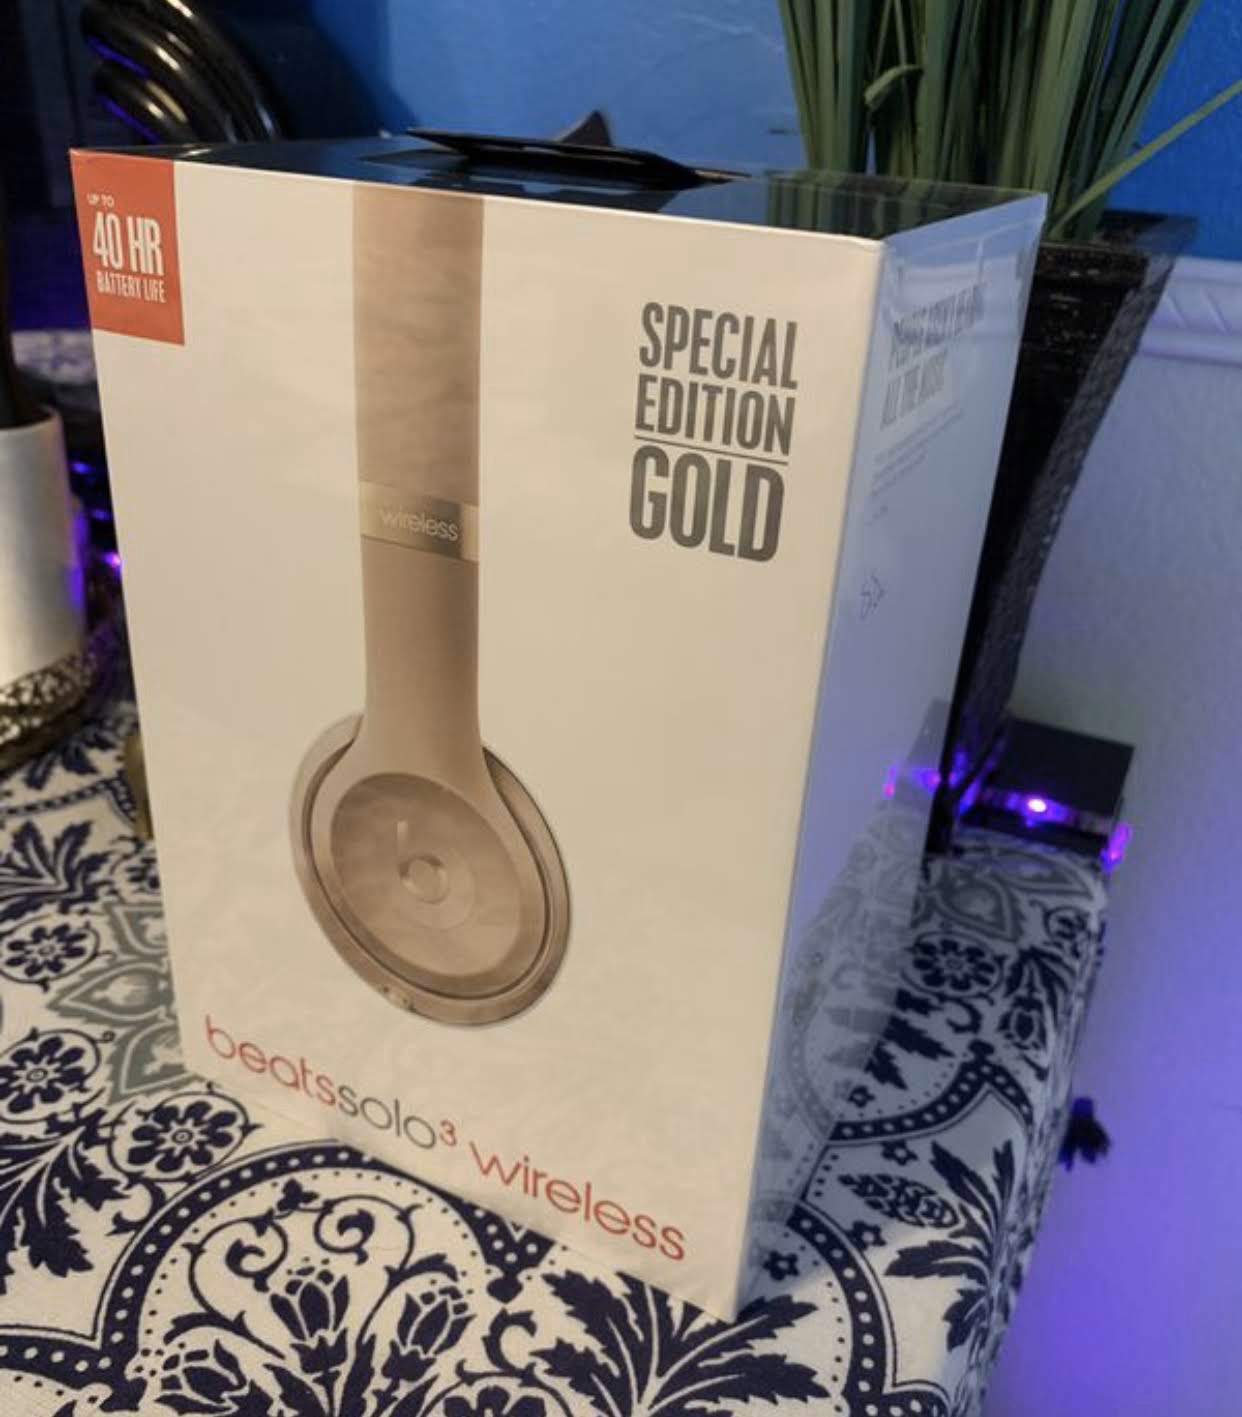 Apple Beats Solo 3 Wireless Gold Limited Edition